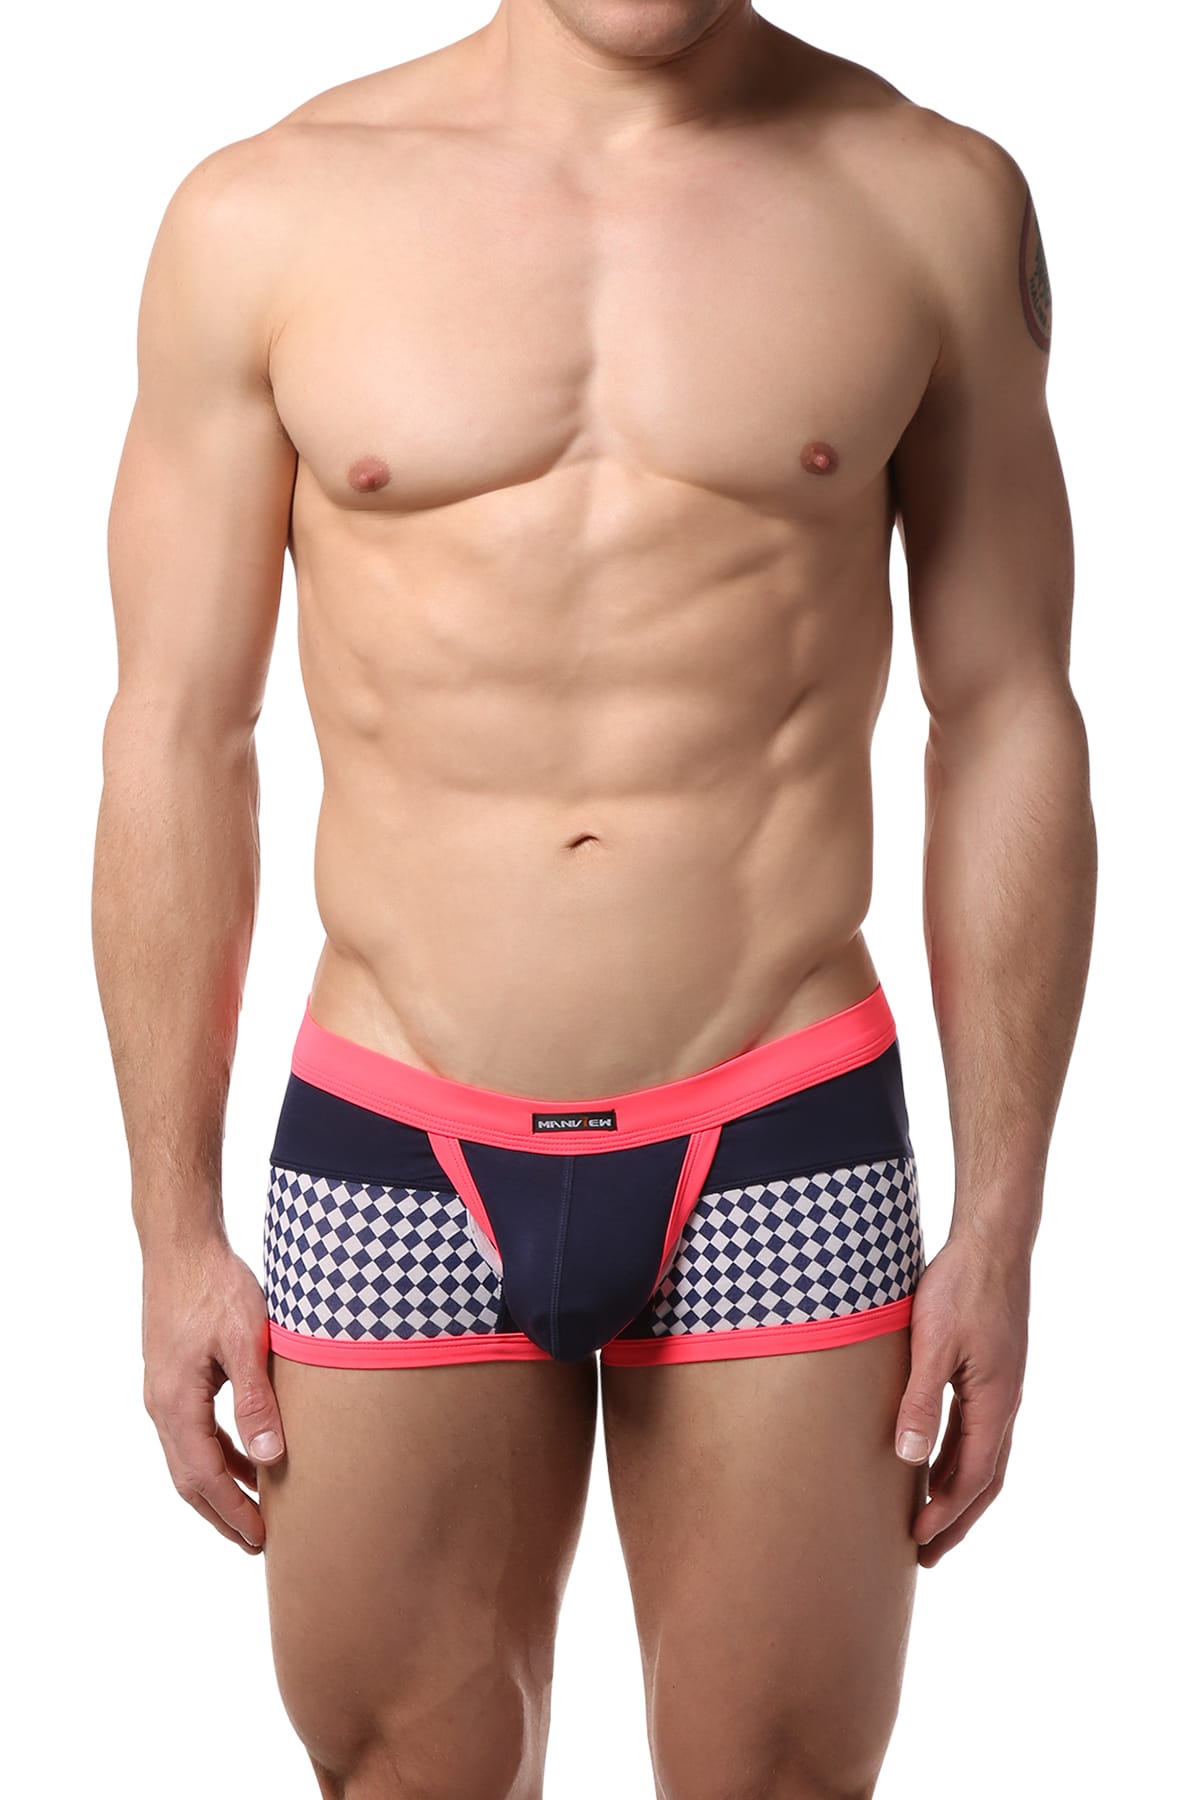 Manview Pink Checkered Trunk